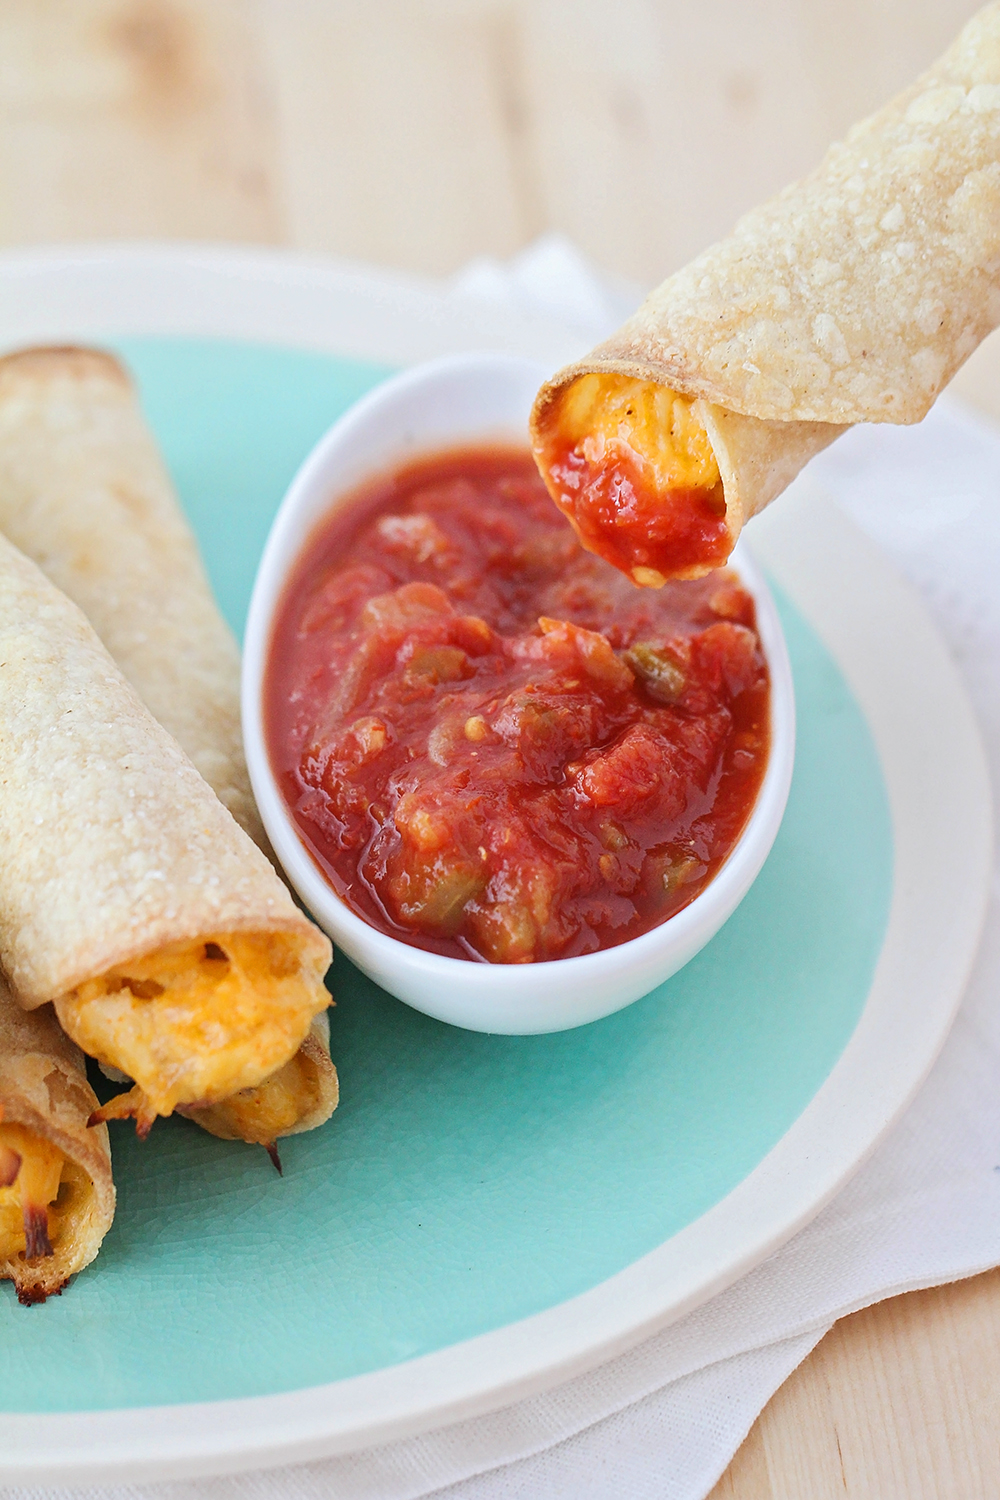 These simple and delicious baked creamy chicken taquitos take just a few minutes to make, and are the perfect quick lunch or snack!